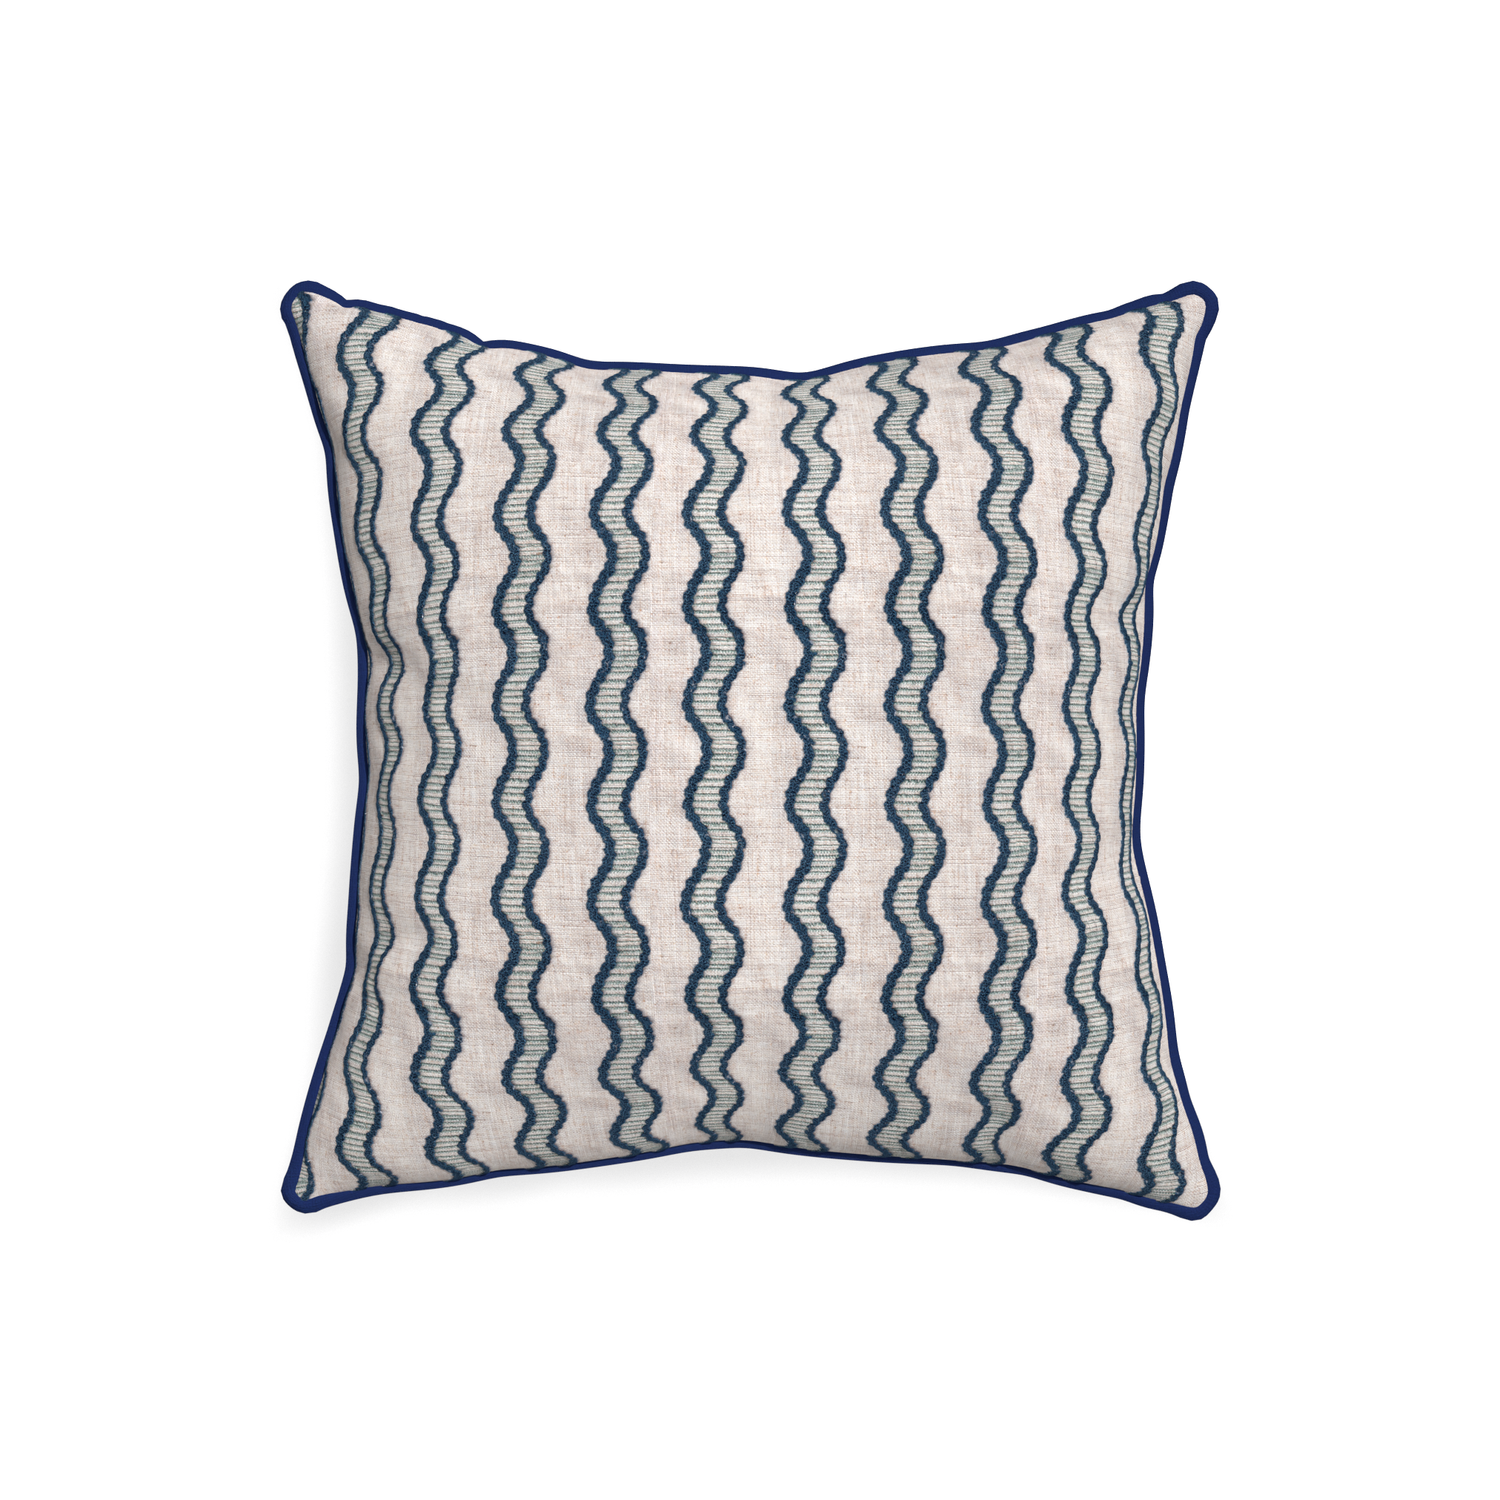 20-square beatrice custom embroidered wavepillow with midnight piping on white background